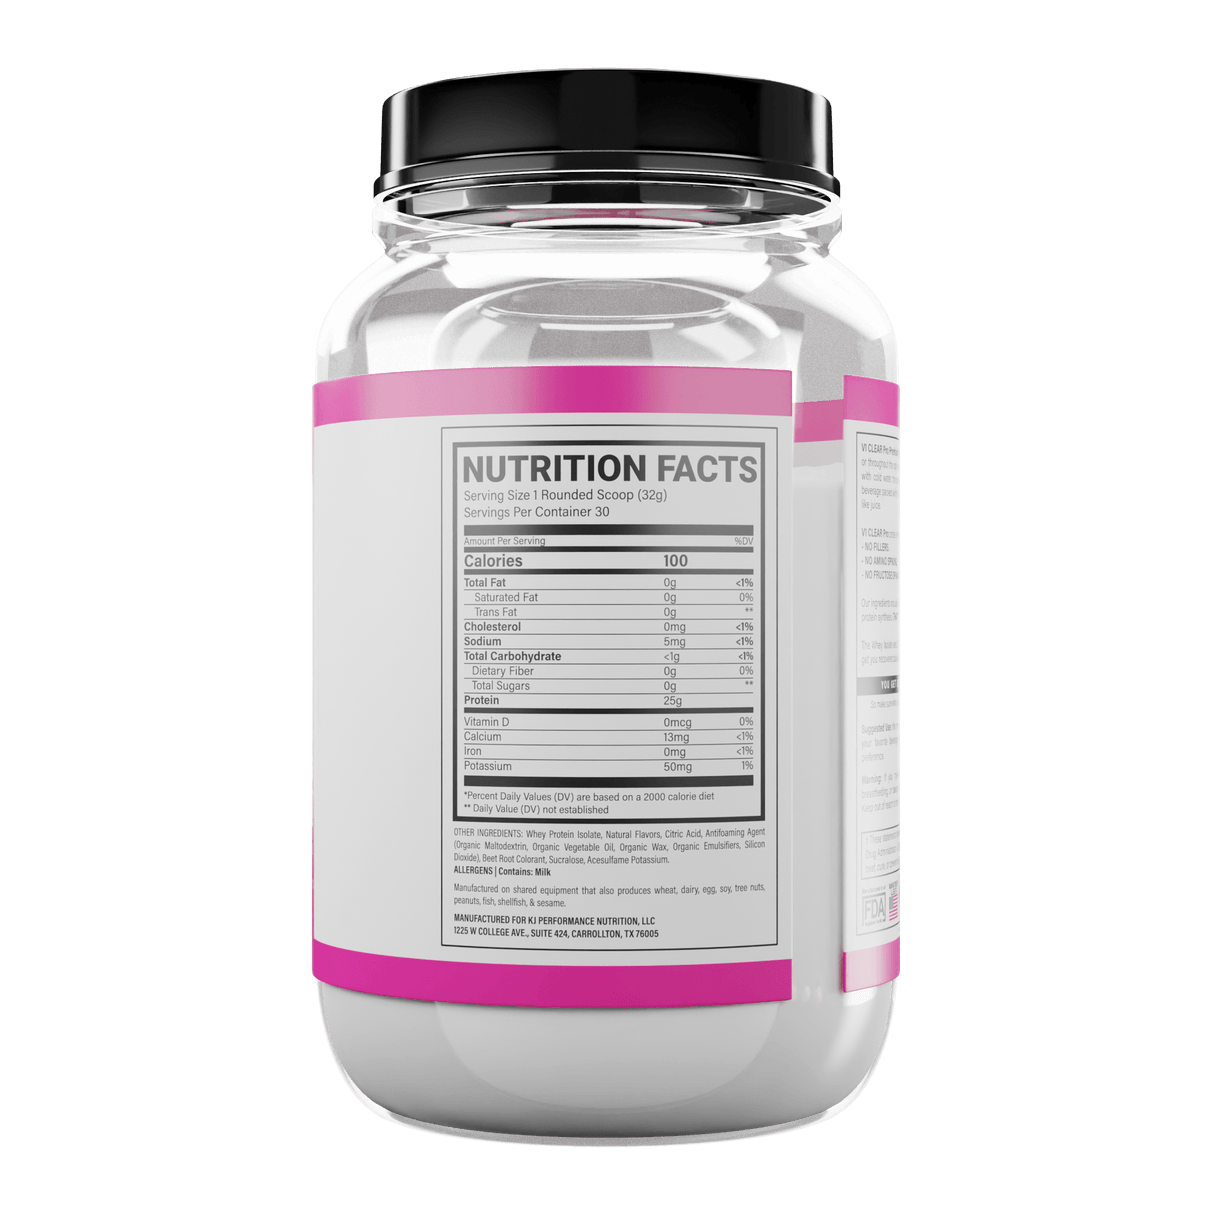 CLEAR JUICE PROTEIN - V1 NUTRA